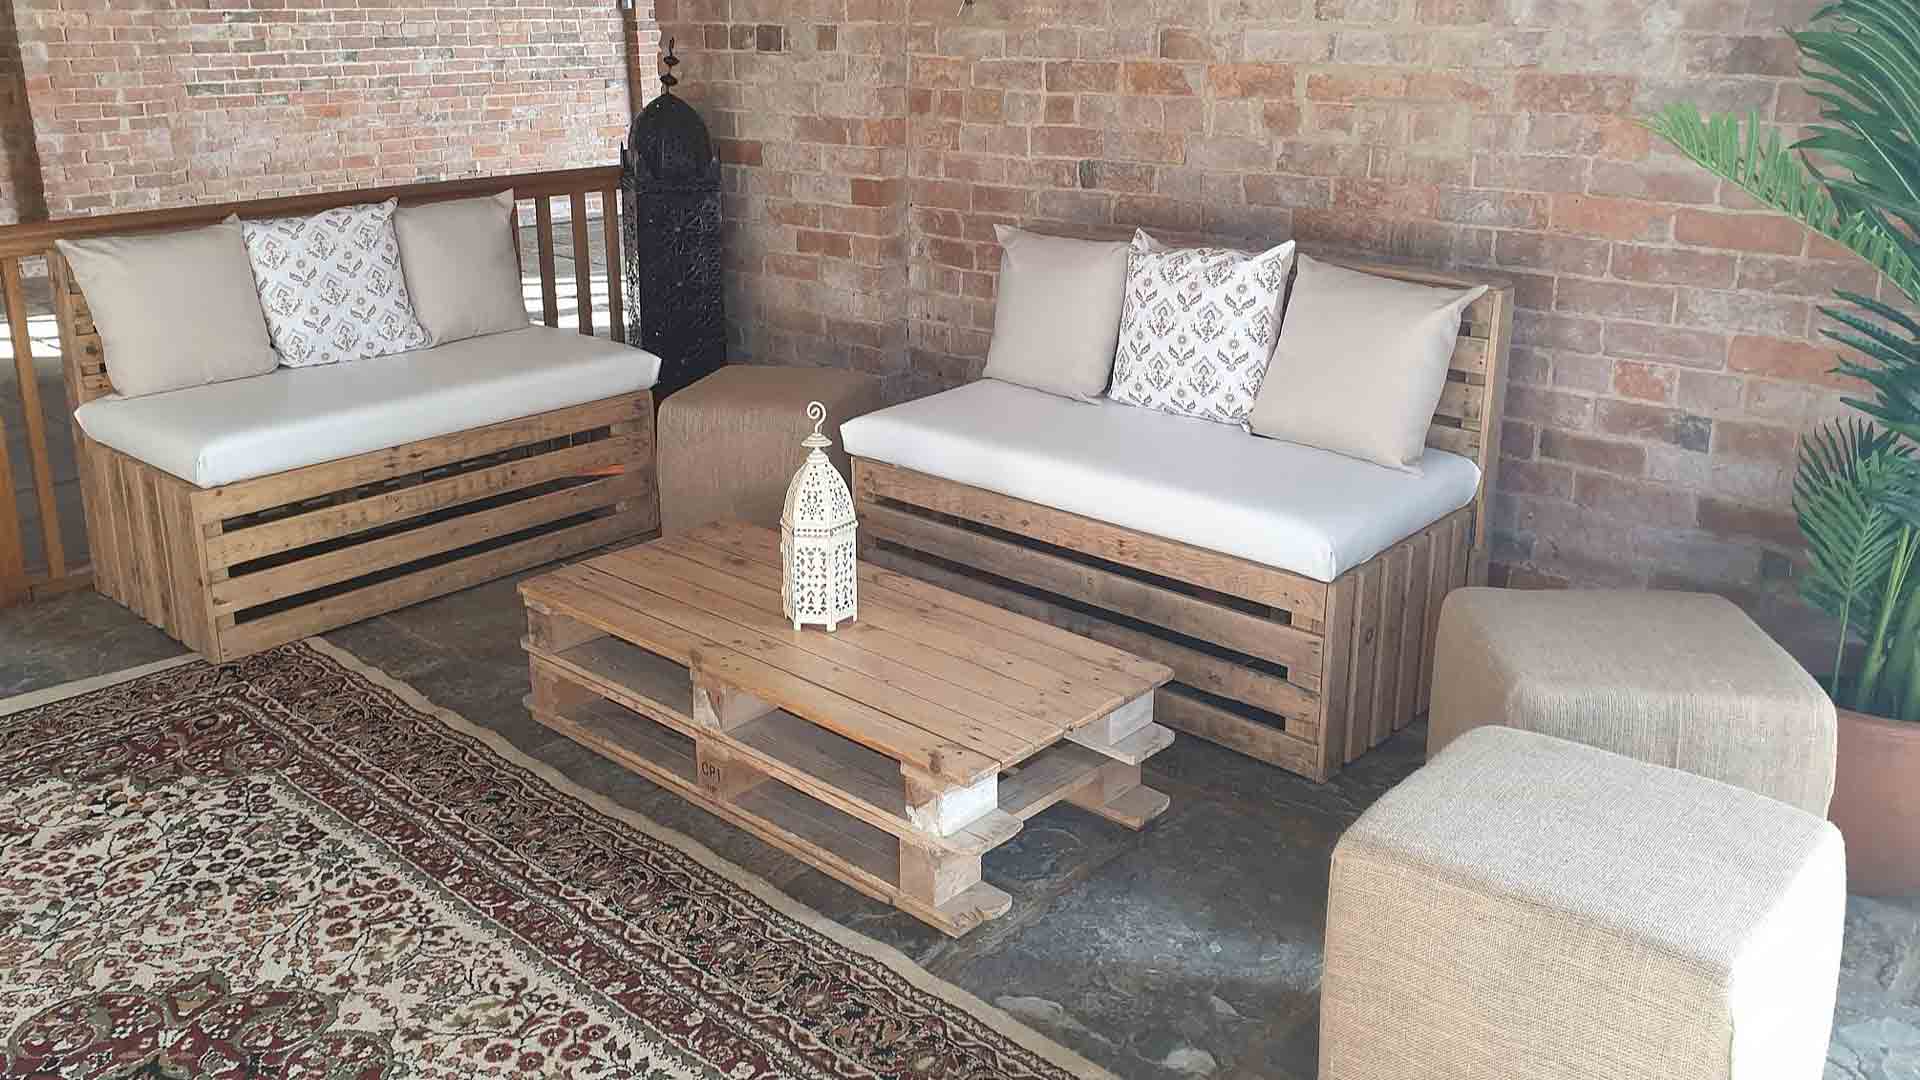 Explore Attentive Events' Range of Arabian Hire Items, Rustic Outdoor Furniture Items, and Outdoor Lighting Options